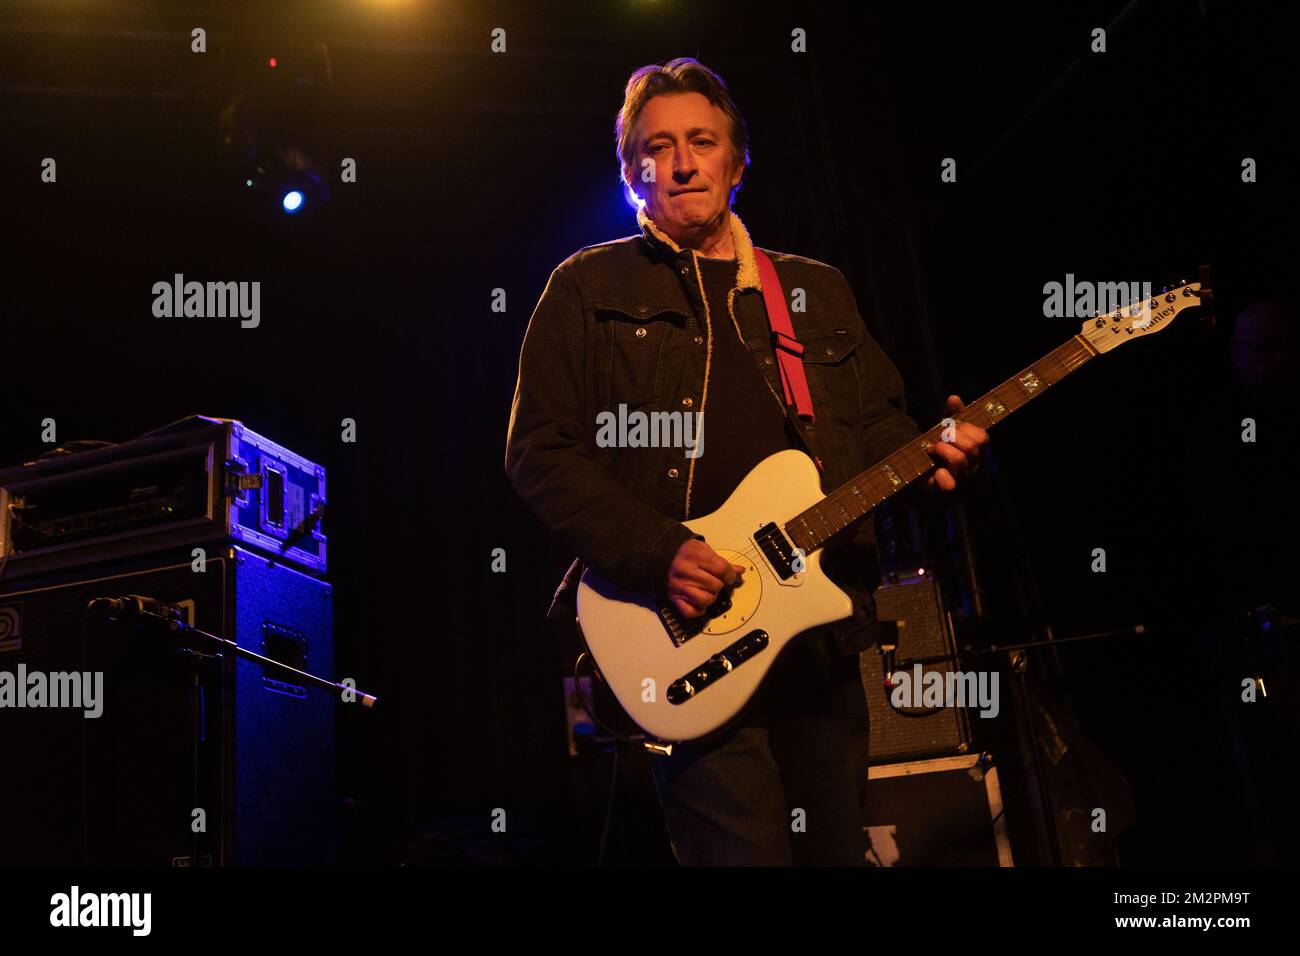 Oxford, United Kingdom. 12th, December 2022. The English rock band The Chameleons performs a live concert at the O2 Academy Oxford in Oxford. Here guitarist Reg Smithies is seen live on stage. (Photo credit: Gonzales Photo – Per-Otto Oppi). Stock Photo